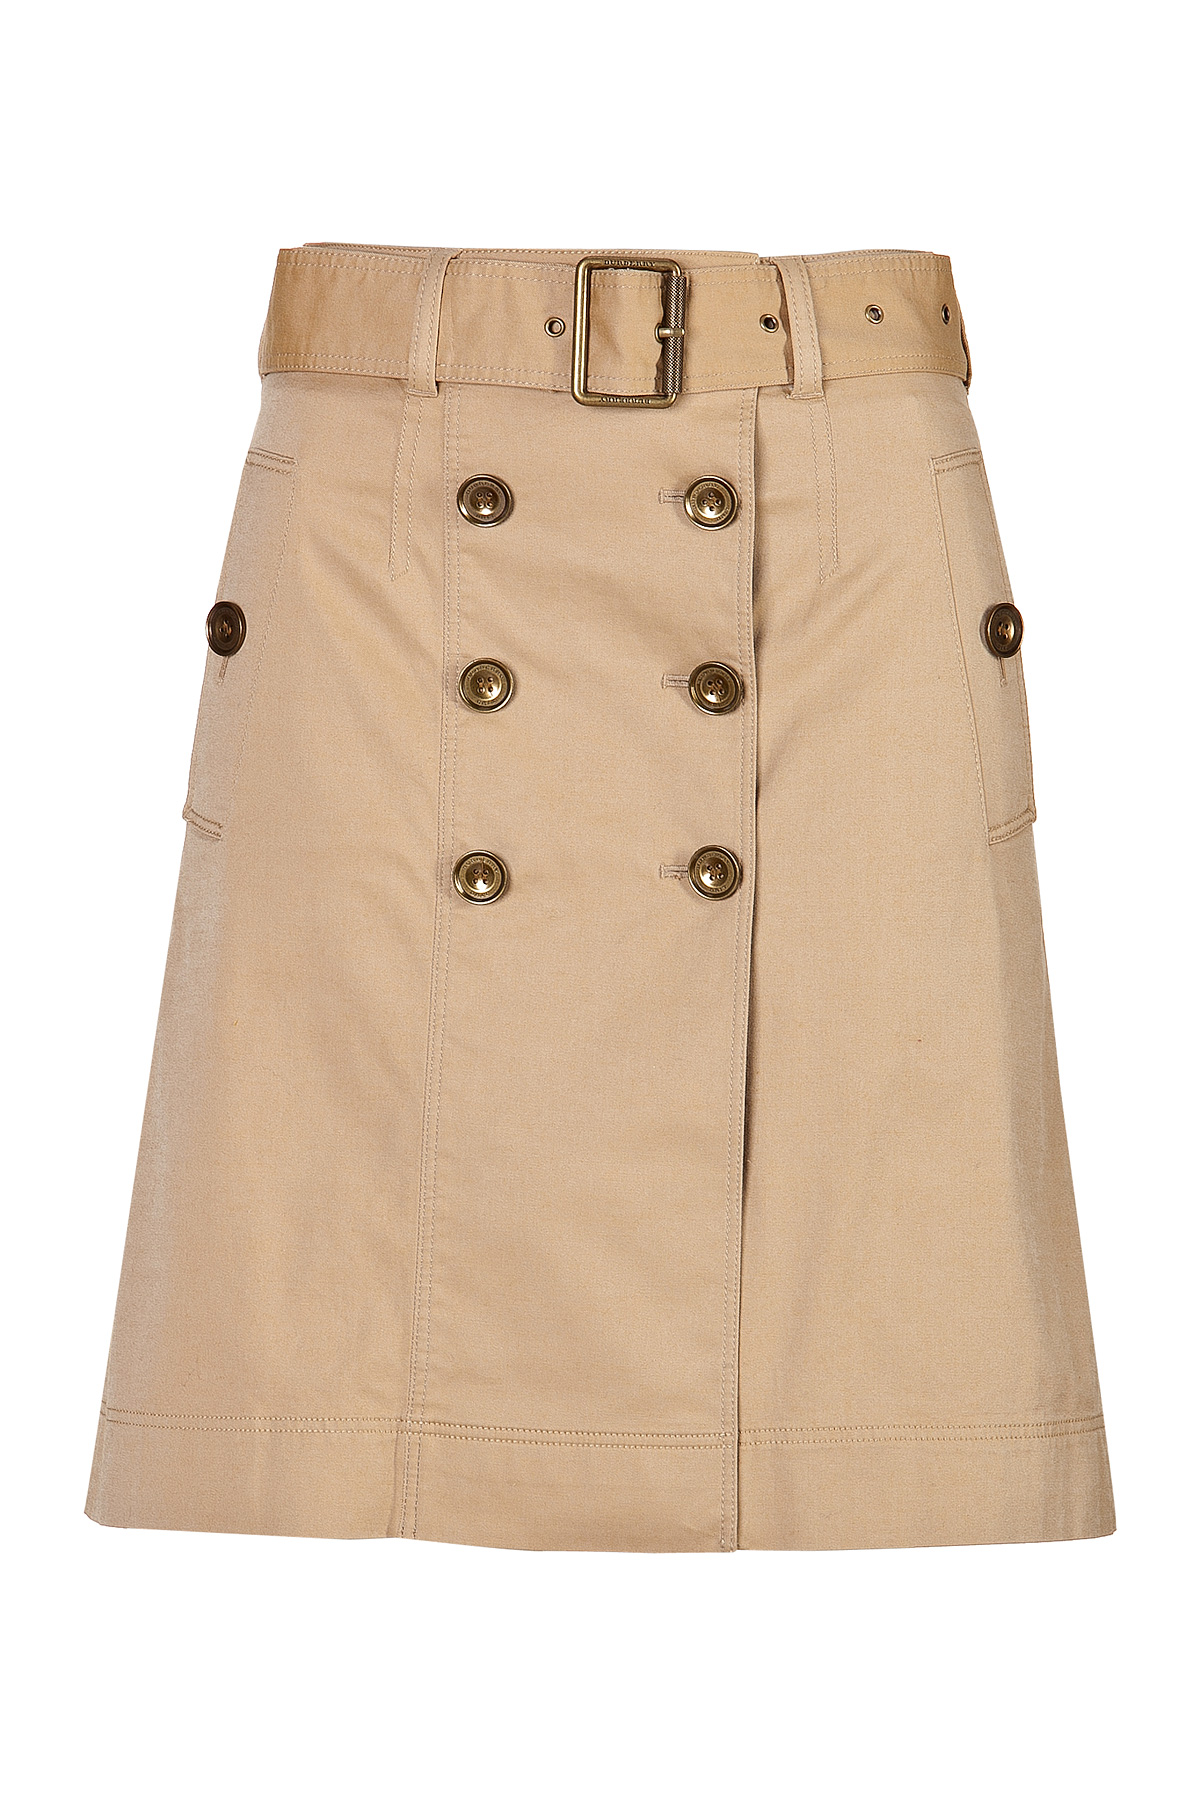 Burberry Brit Cotton A-line Skirt in Brown | Lyst